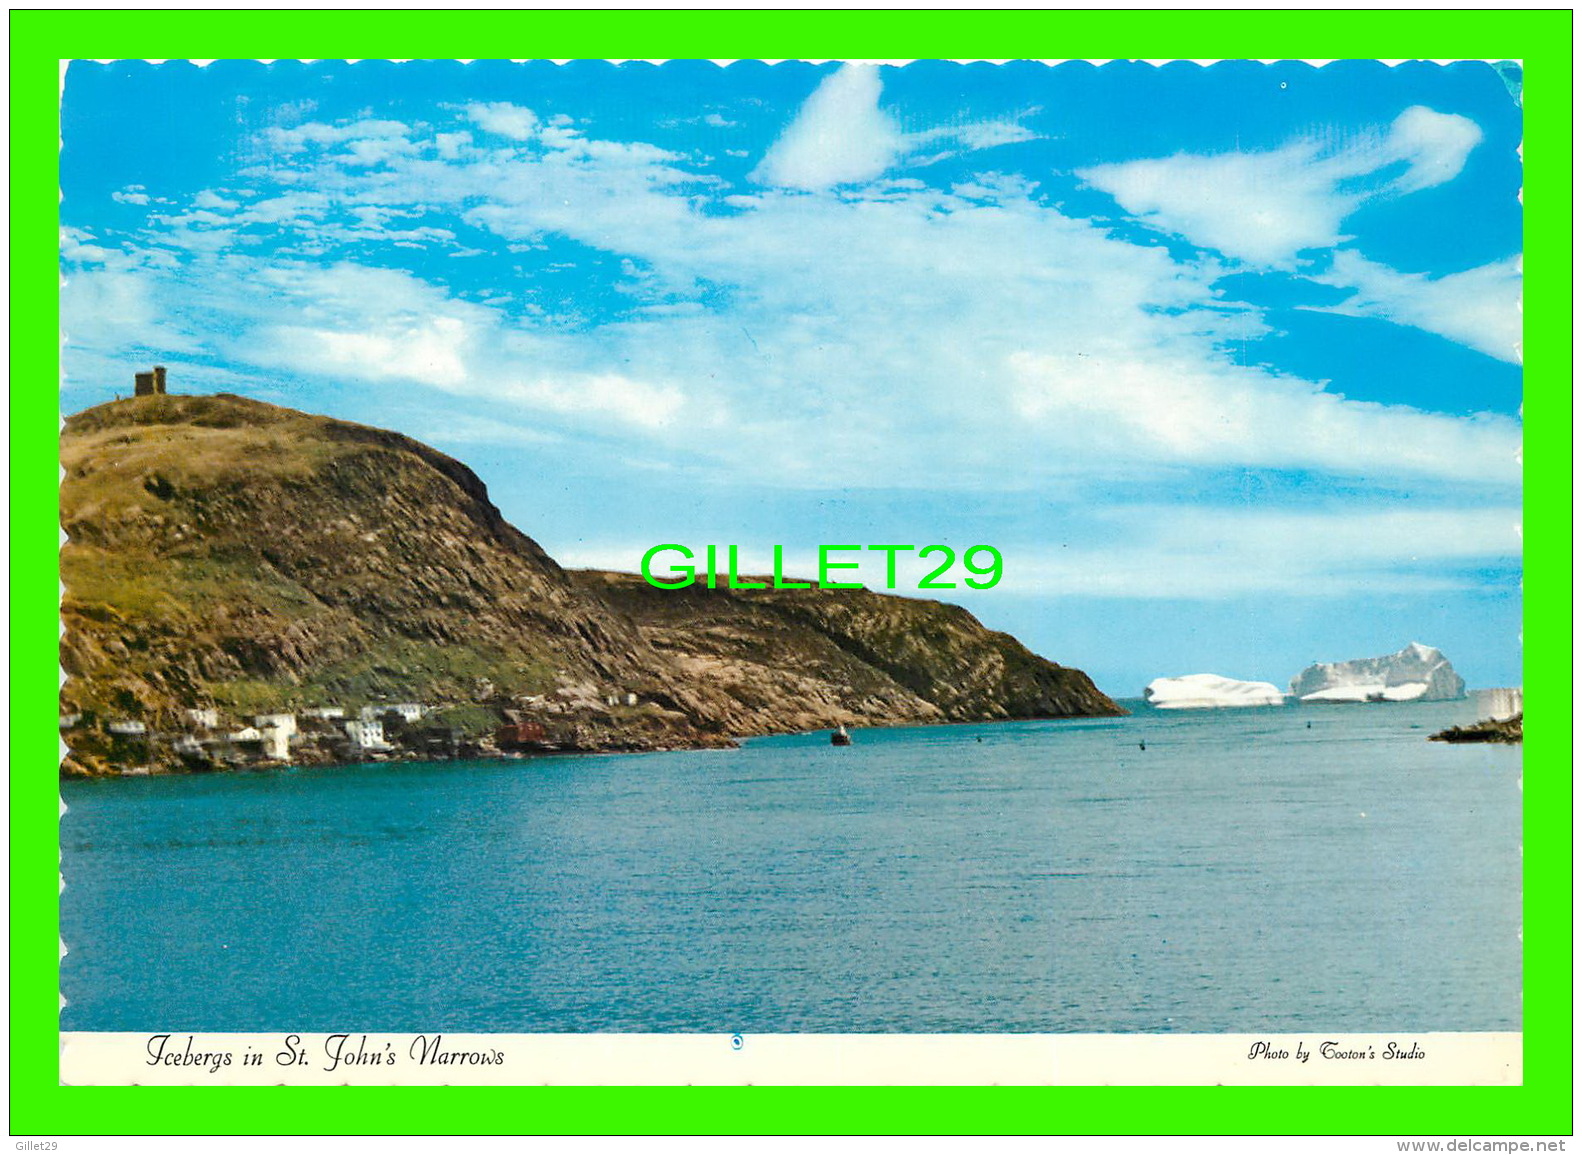 ST JOHN'S, NEWFOUNDLAND - ICEBERG CAUGHT IN THE NARROWS ENTRANCE OF THE HARBOUR - PUB. BY TOOTON'S LTD - - St. John's